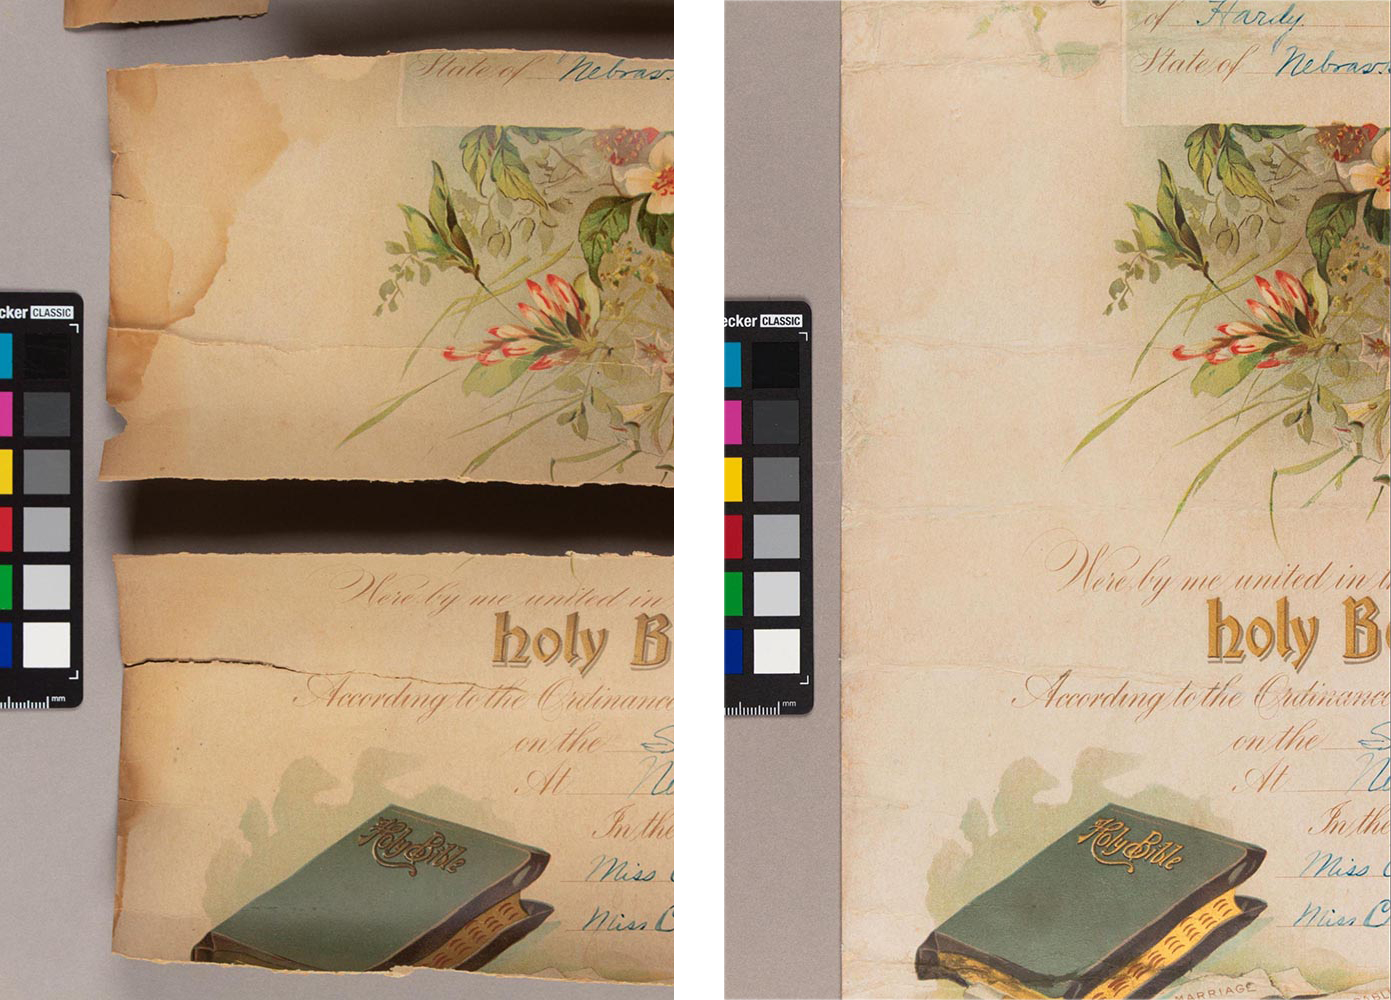 These before- and after- treatment details show the results of washing and toning for the marriage certificate.